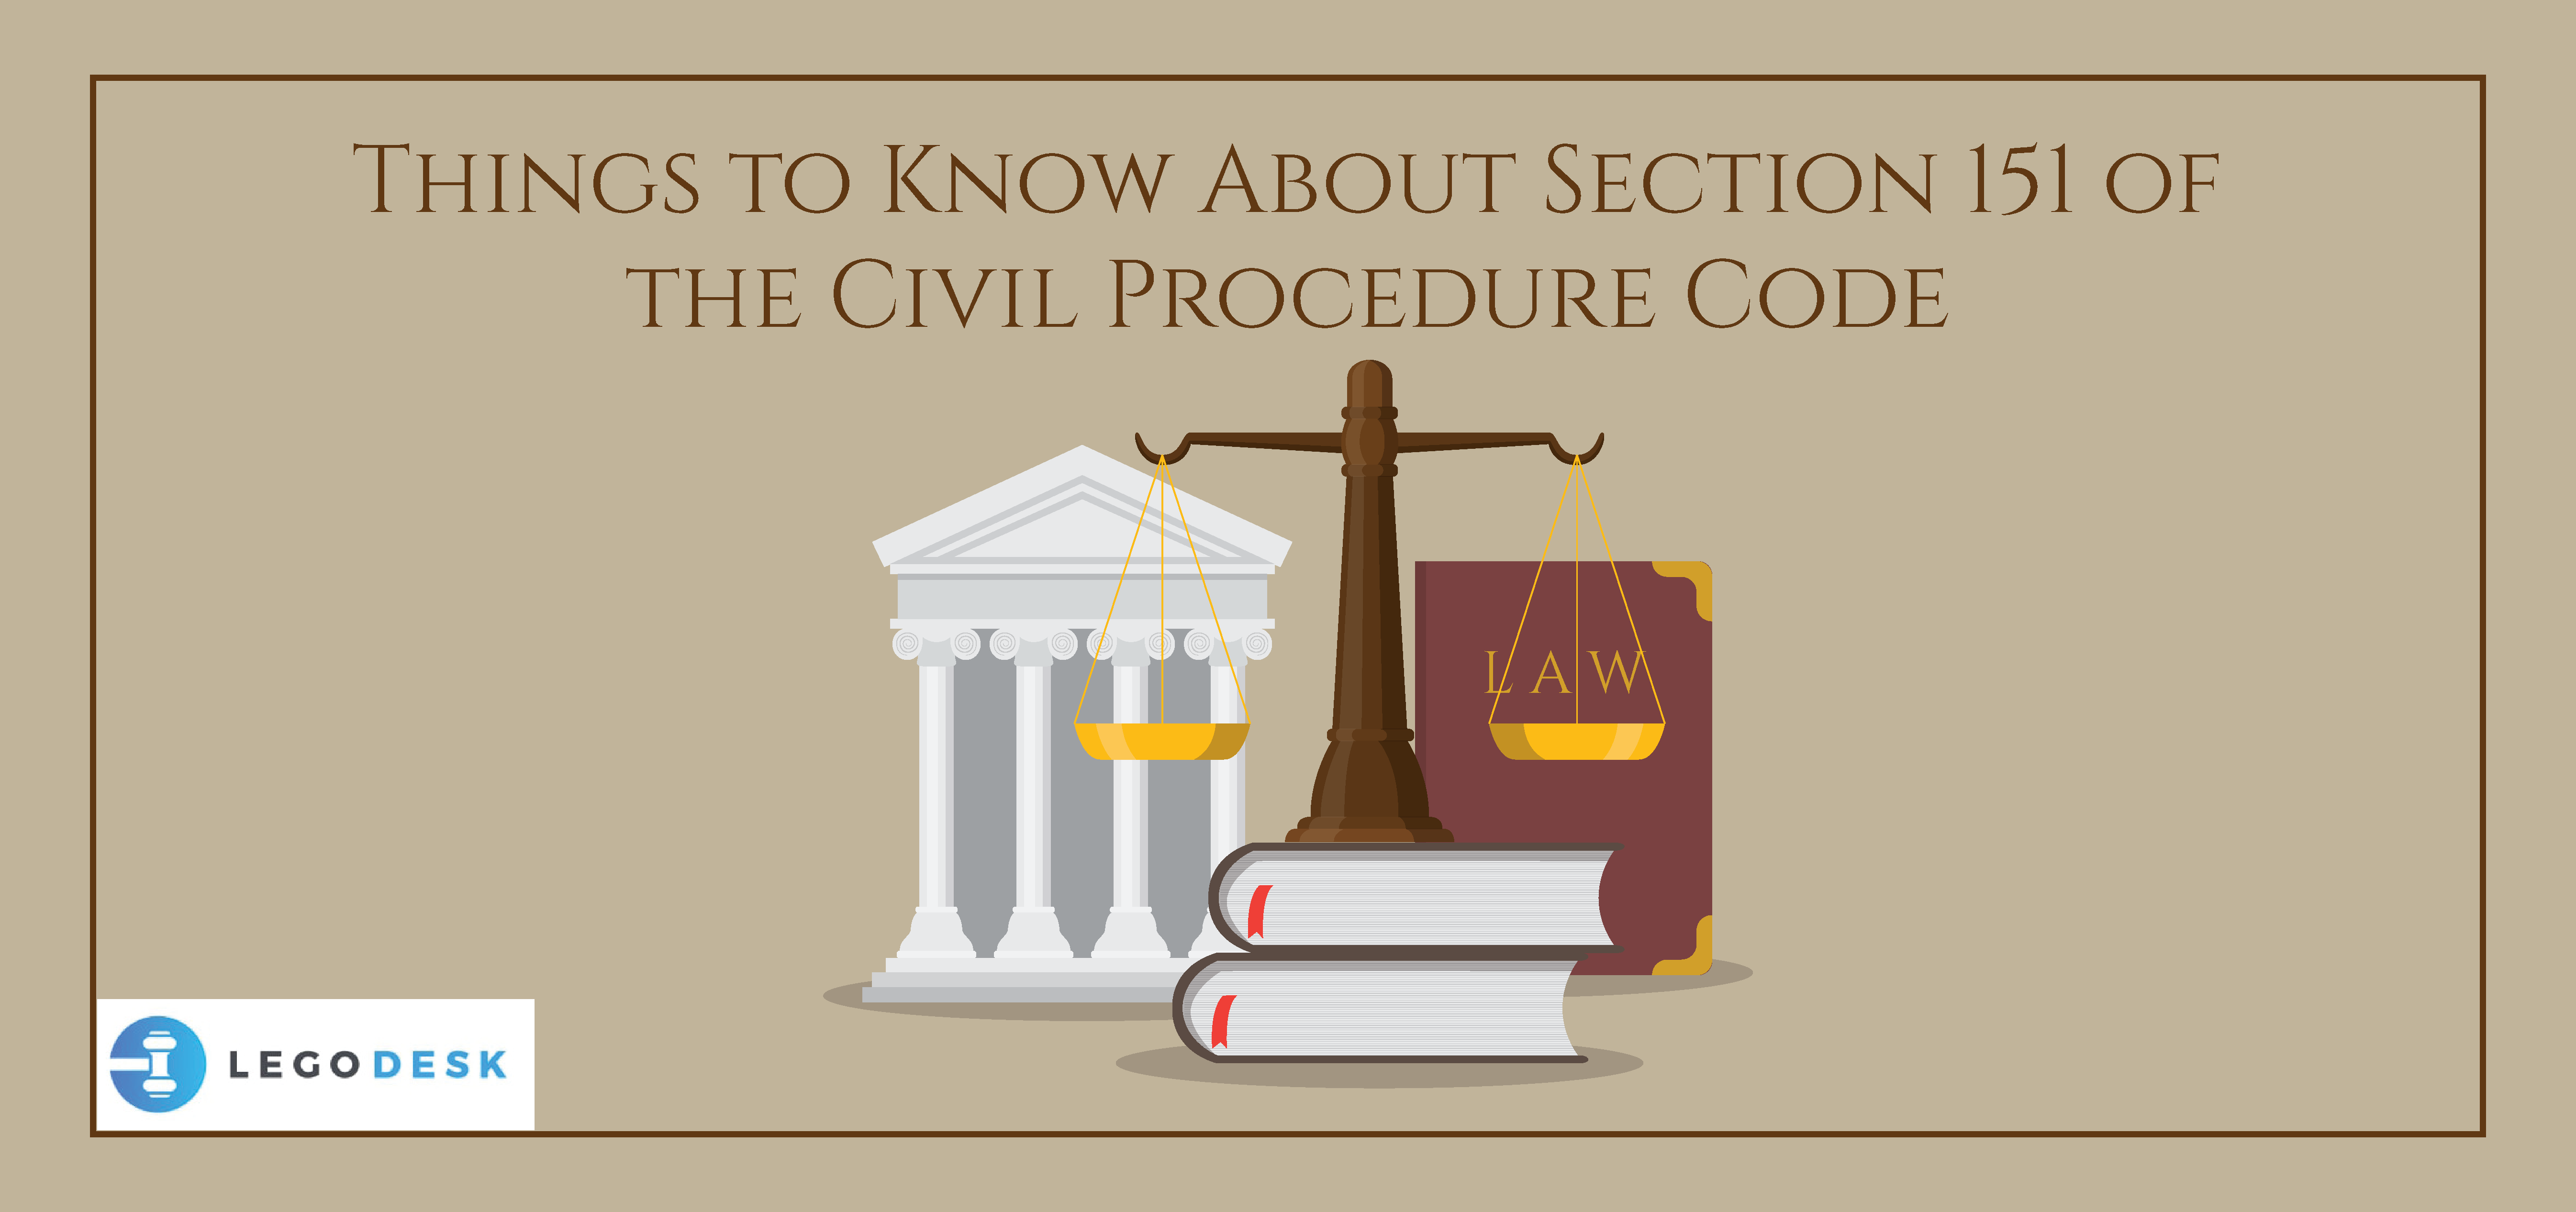 Section 151 of the Civil Procedure Code